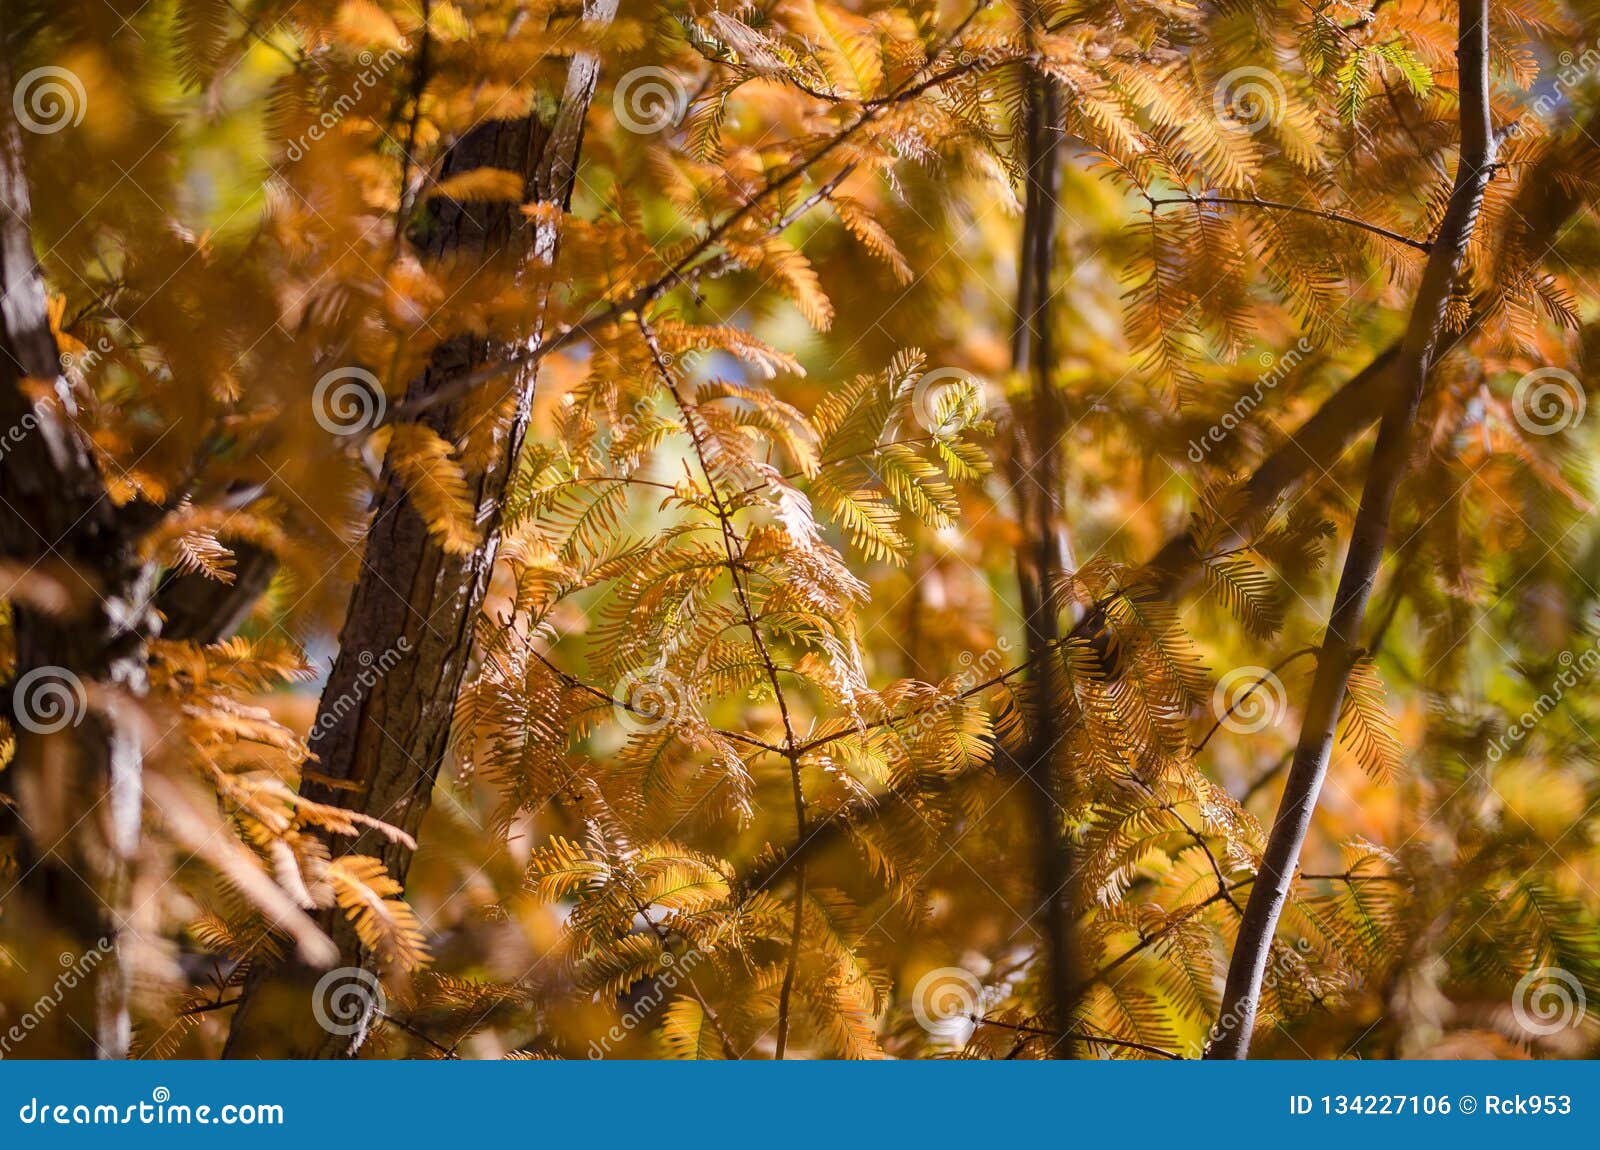 Golden Branches of Autumn Displayed on a Dawn Redwood Tree Stock Photo